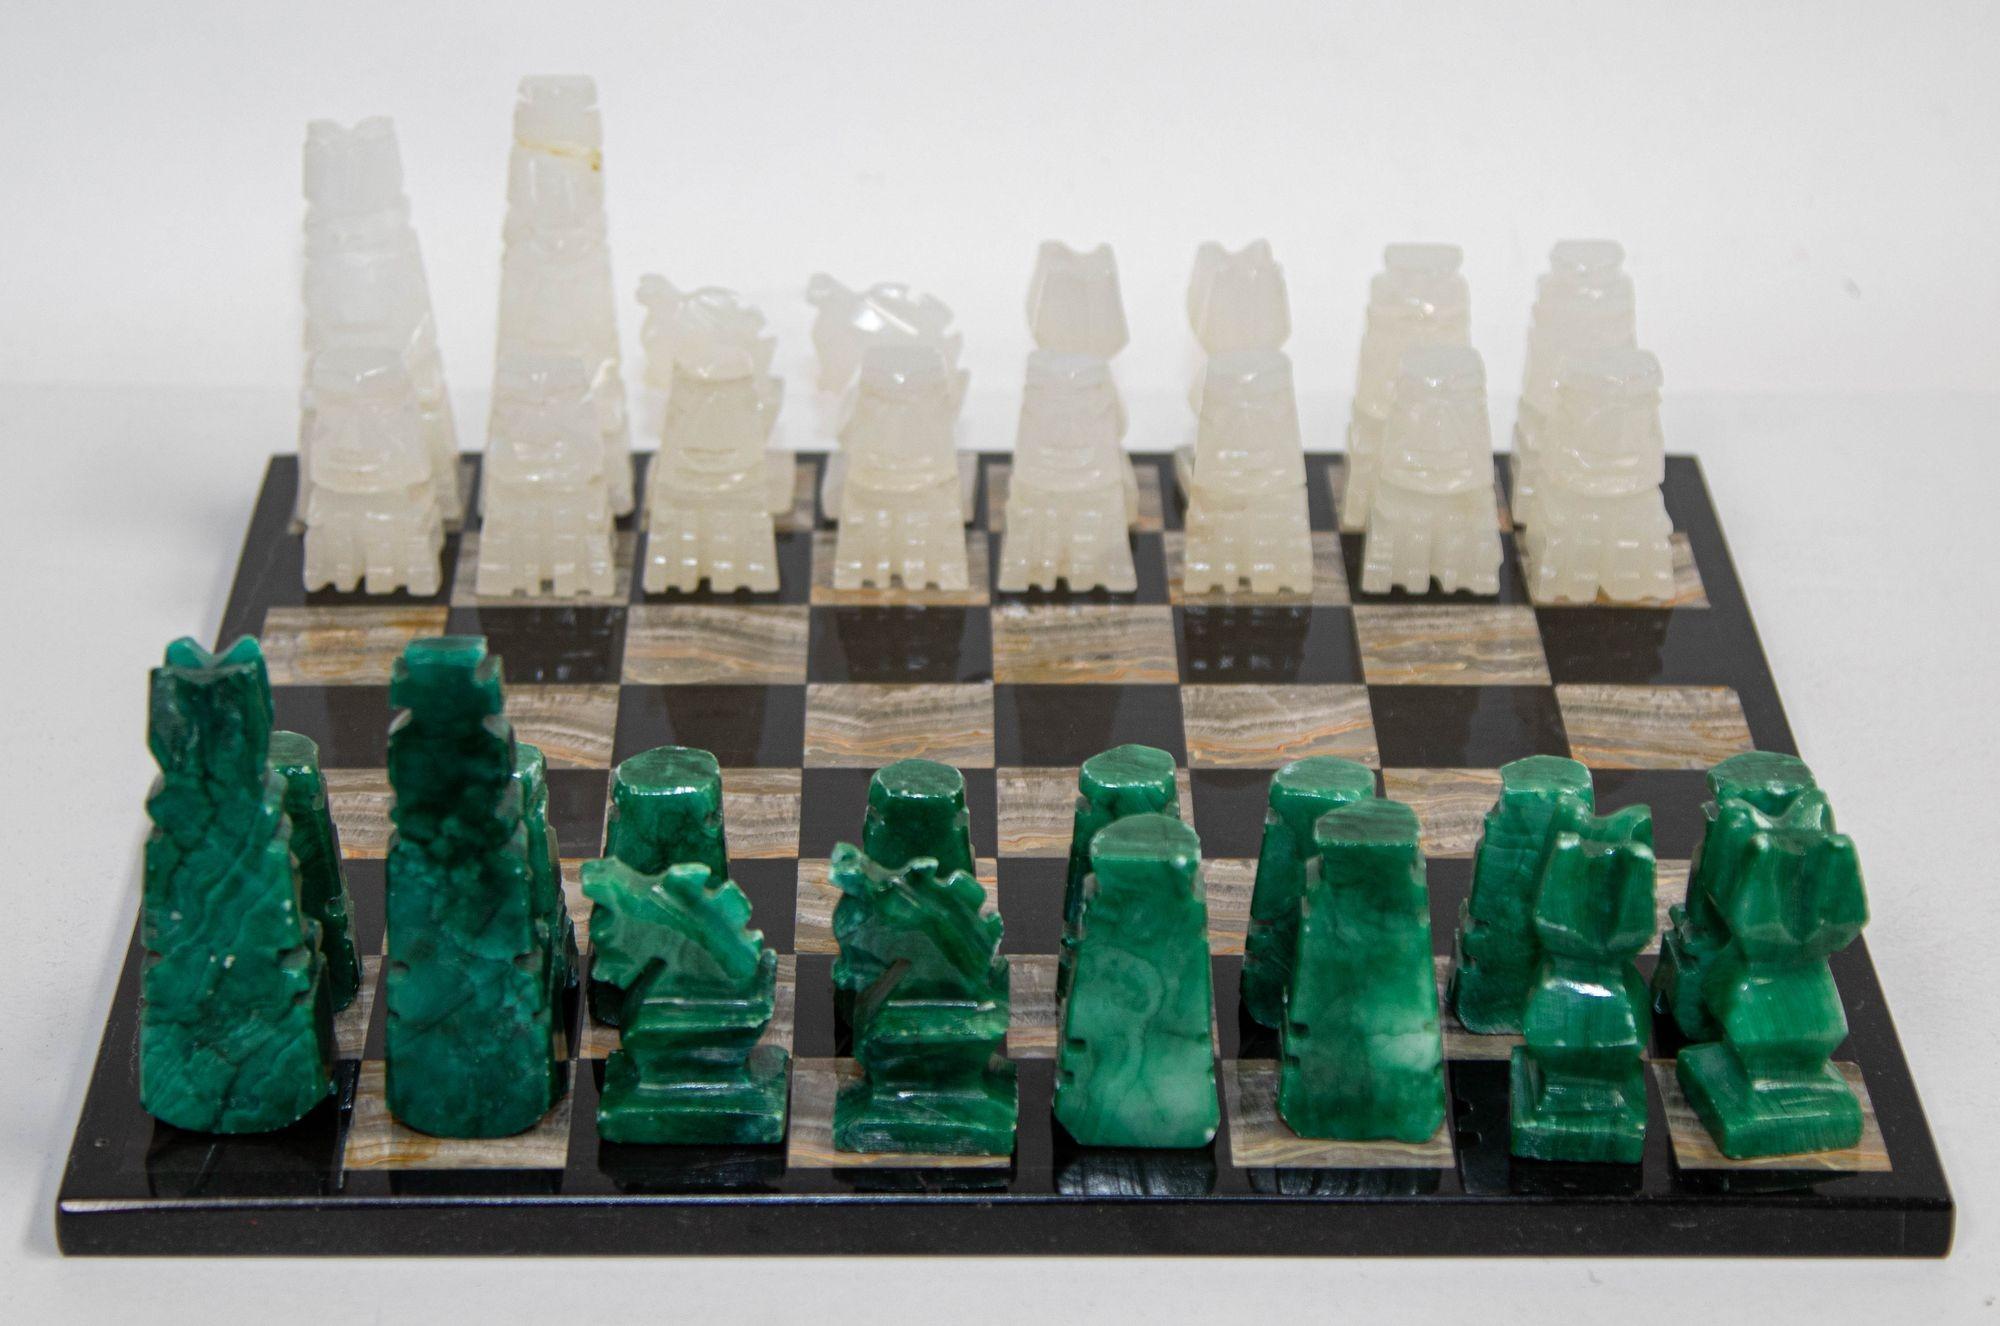 Vintage marble large chess set with hand-carved green onyx pieces.
Vintage mid 20th century Mexican stone marble chess set complete chess board in brown and black marble stone with elaborately hand carved green and white chess pieces.
The stone